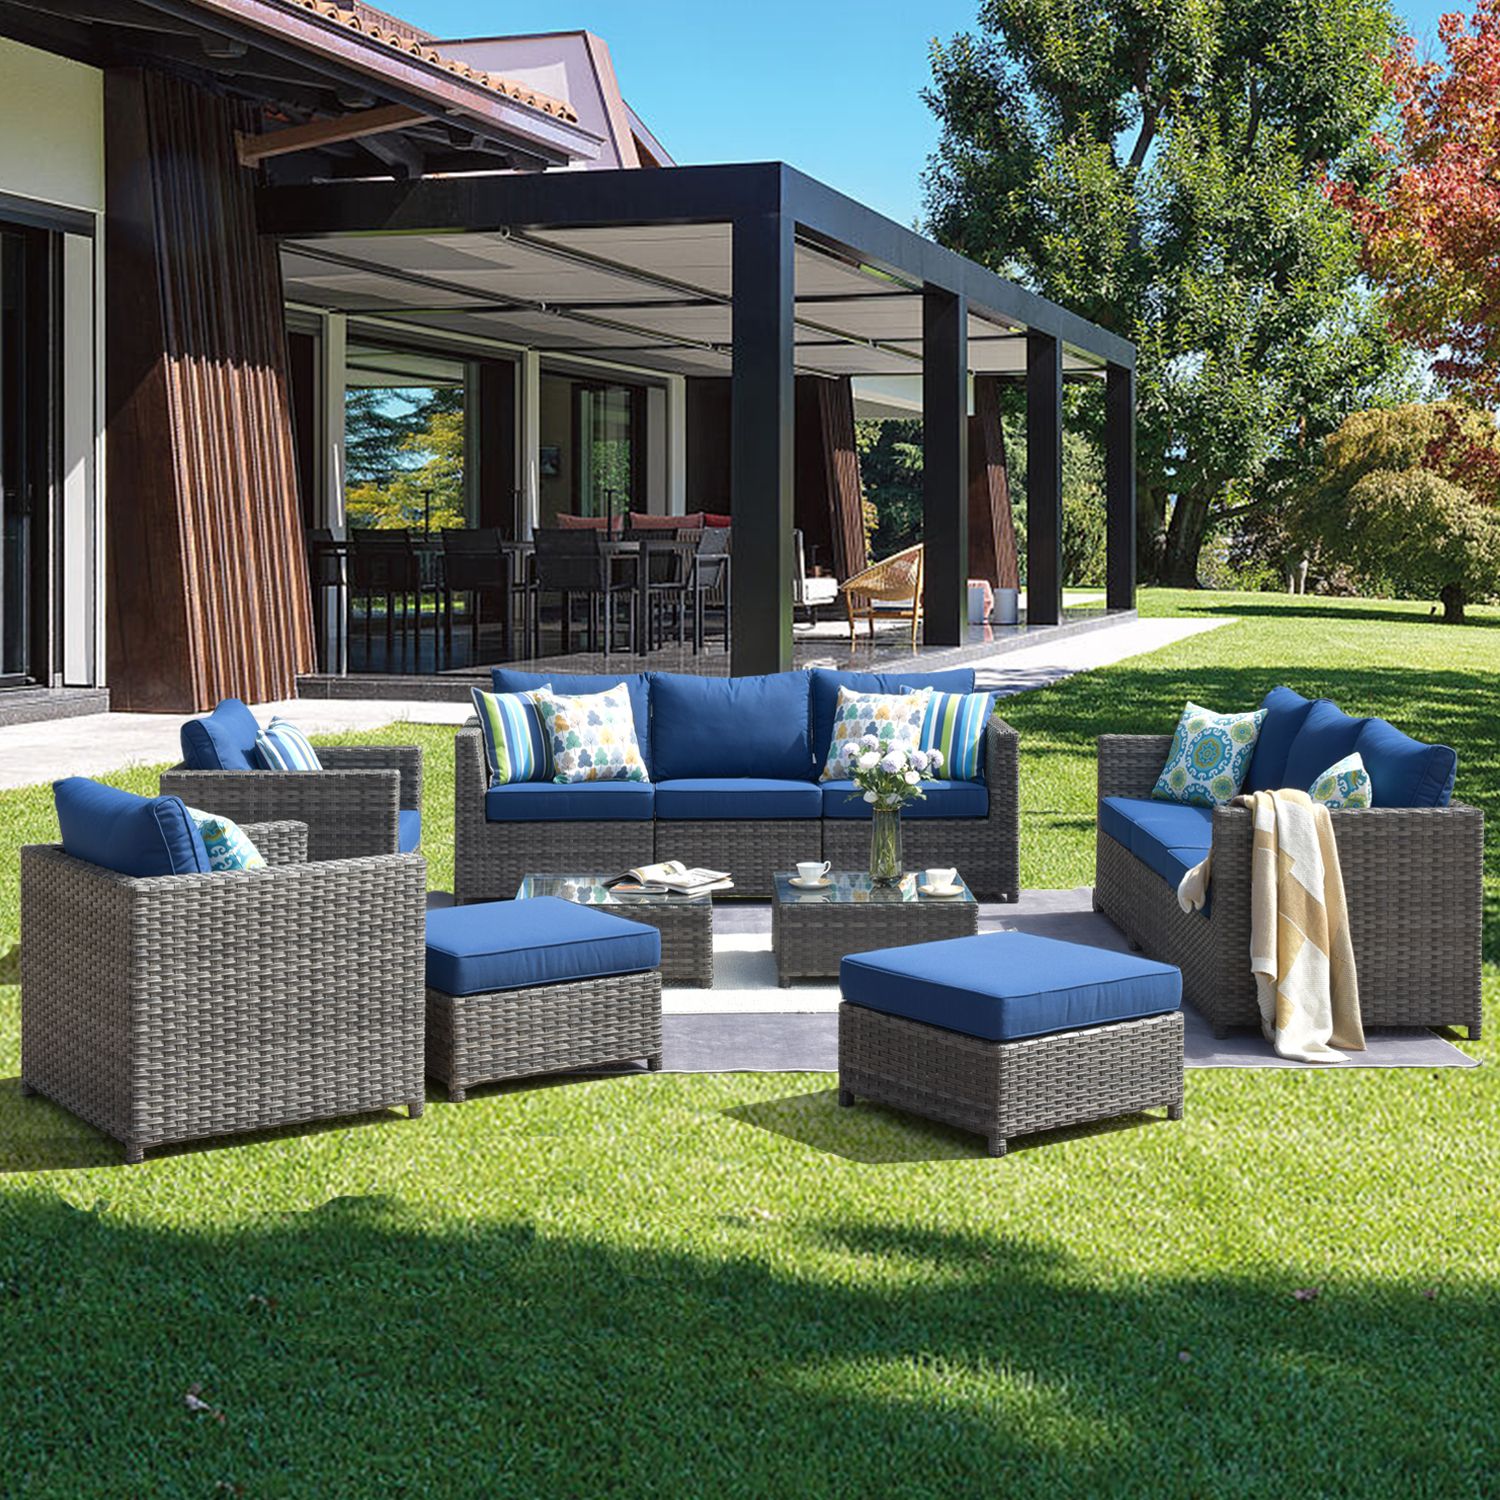 Newest Ovios Patio Furniture Set, Big Size Outdoor Furniture Sets,pe Rattan Pertaining To Navy Outdoor Seating Sectional Patio Sets (View 6 of 15)